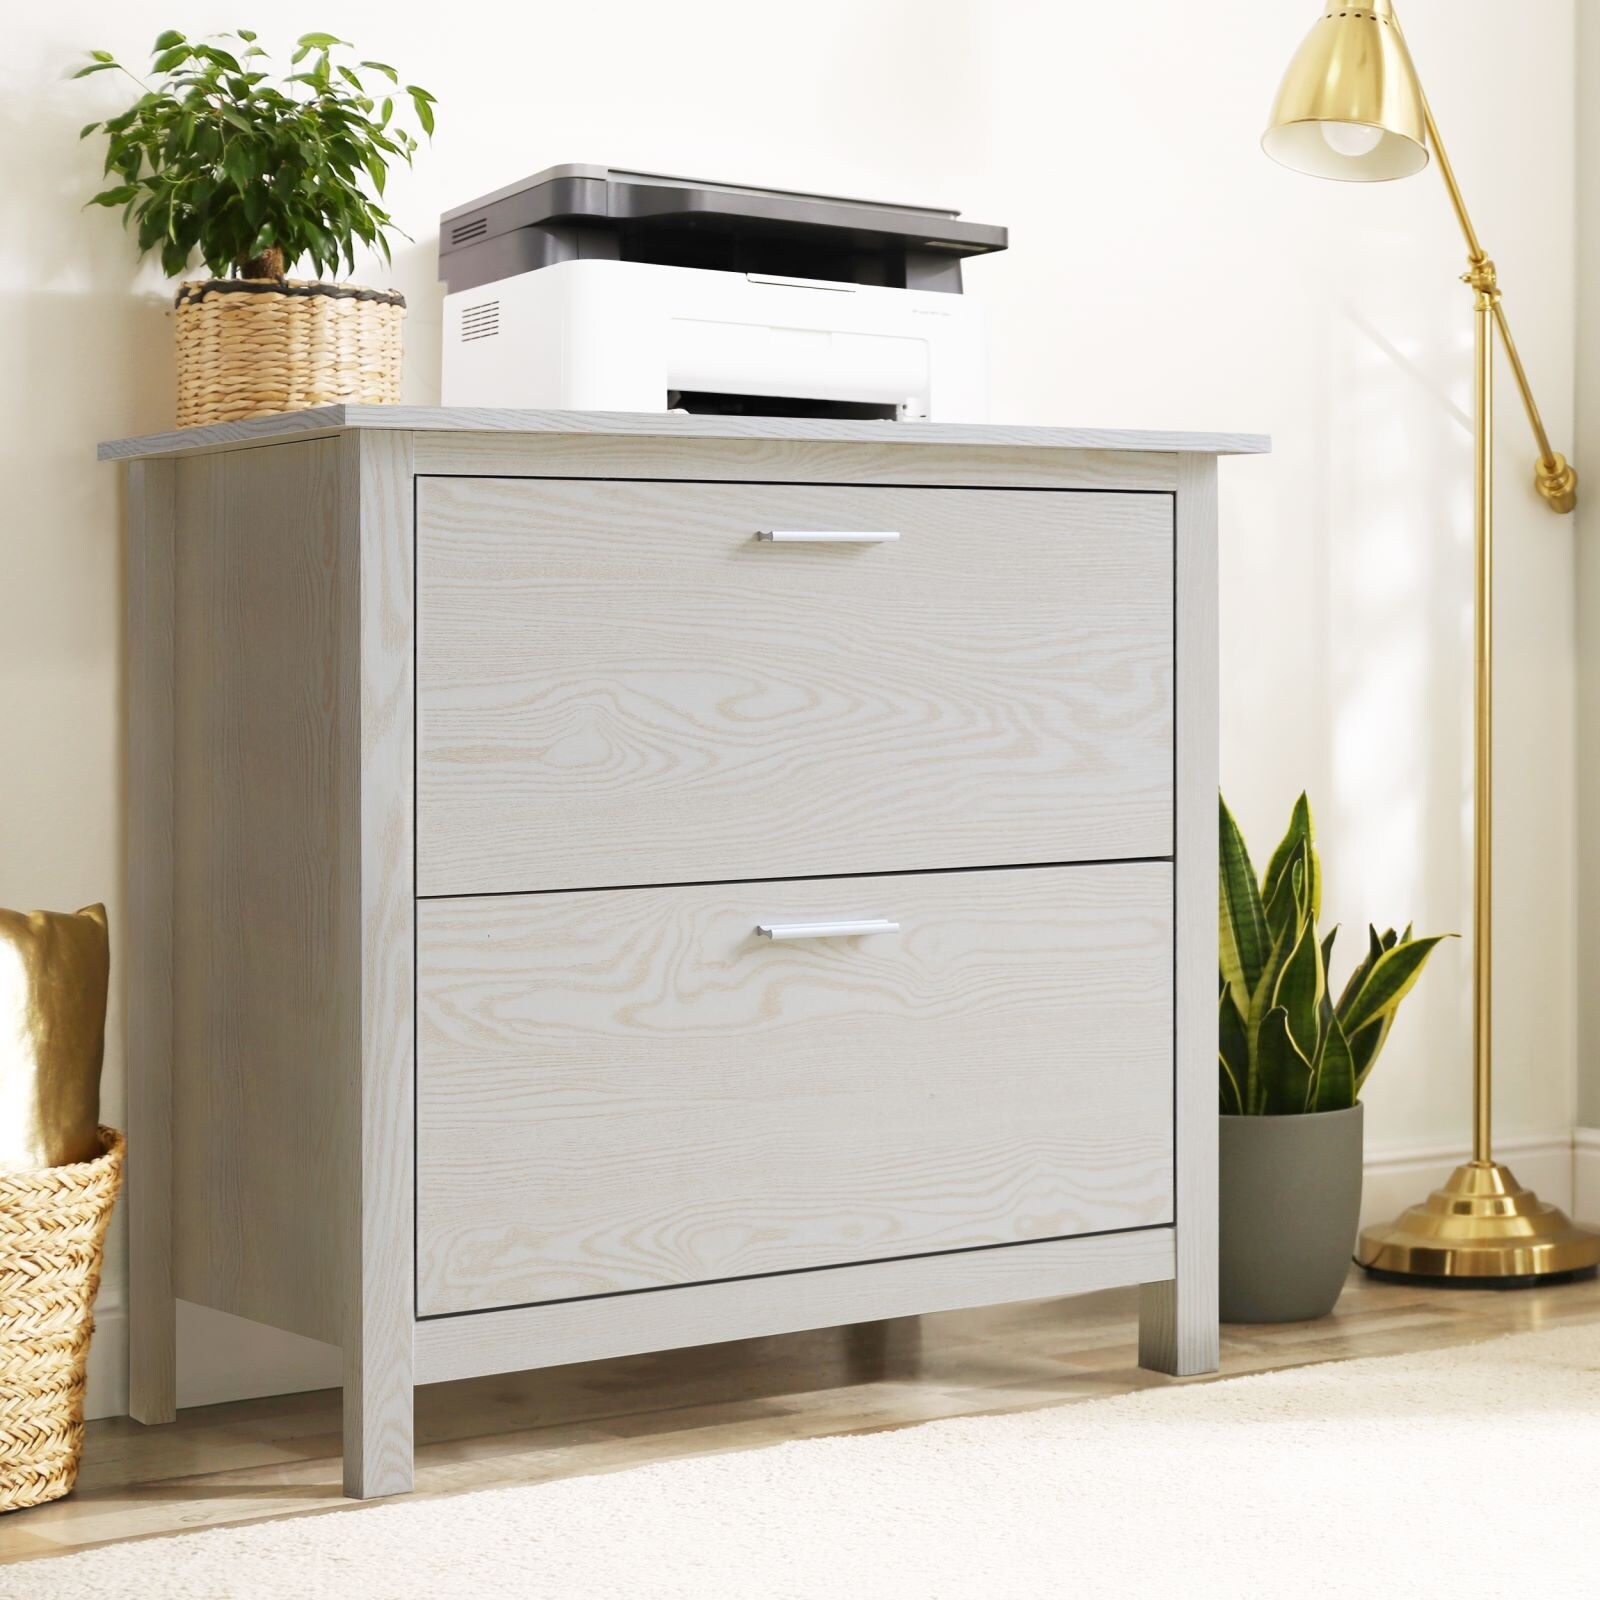 Grey VEIKOUS 2 Drawer Lateral File Cabinet 28” W x 18.5 D x 30 H Large and Deep Filing Cabinet for Home Office with Anti-Tipping Mechanism and Adjustable Rails 